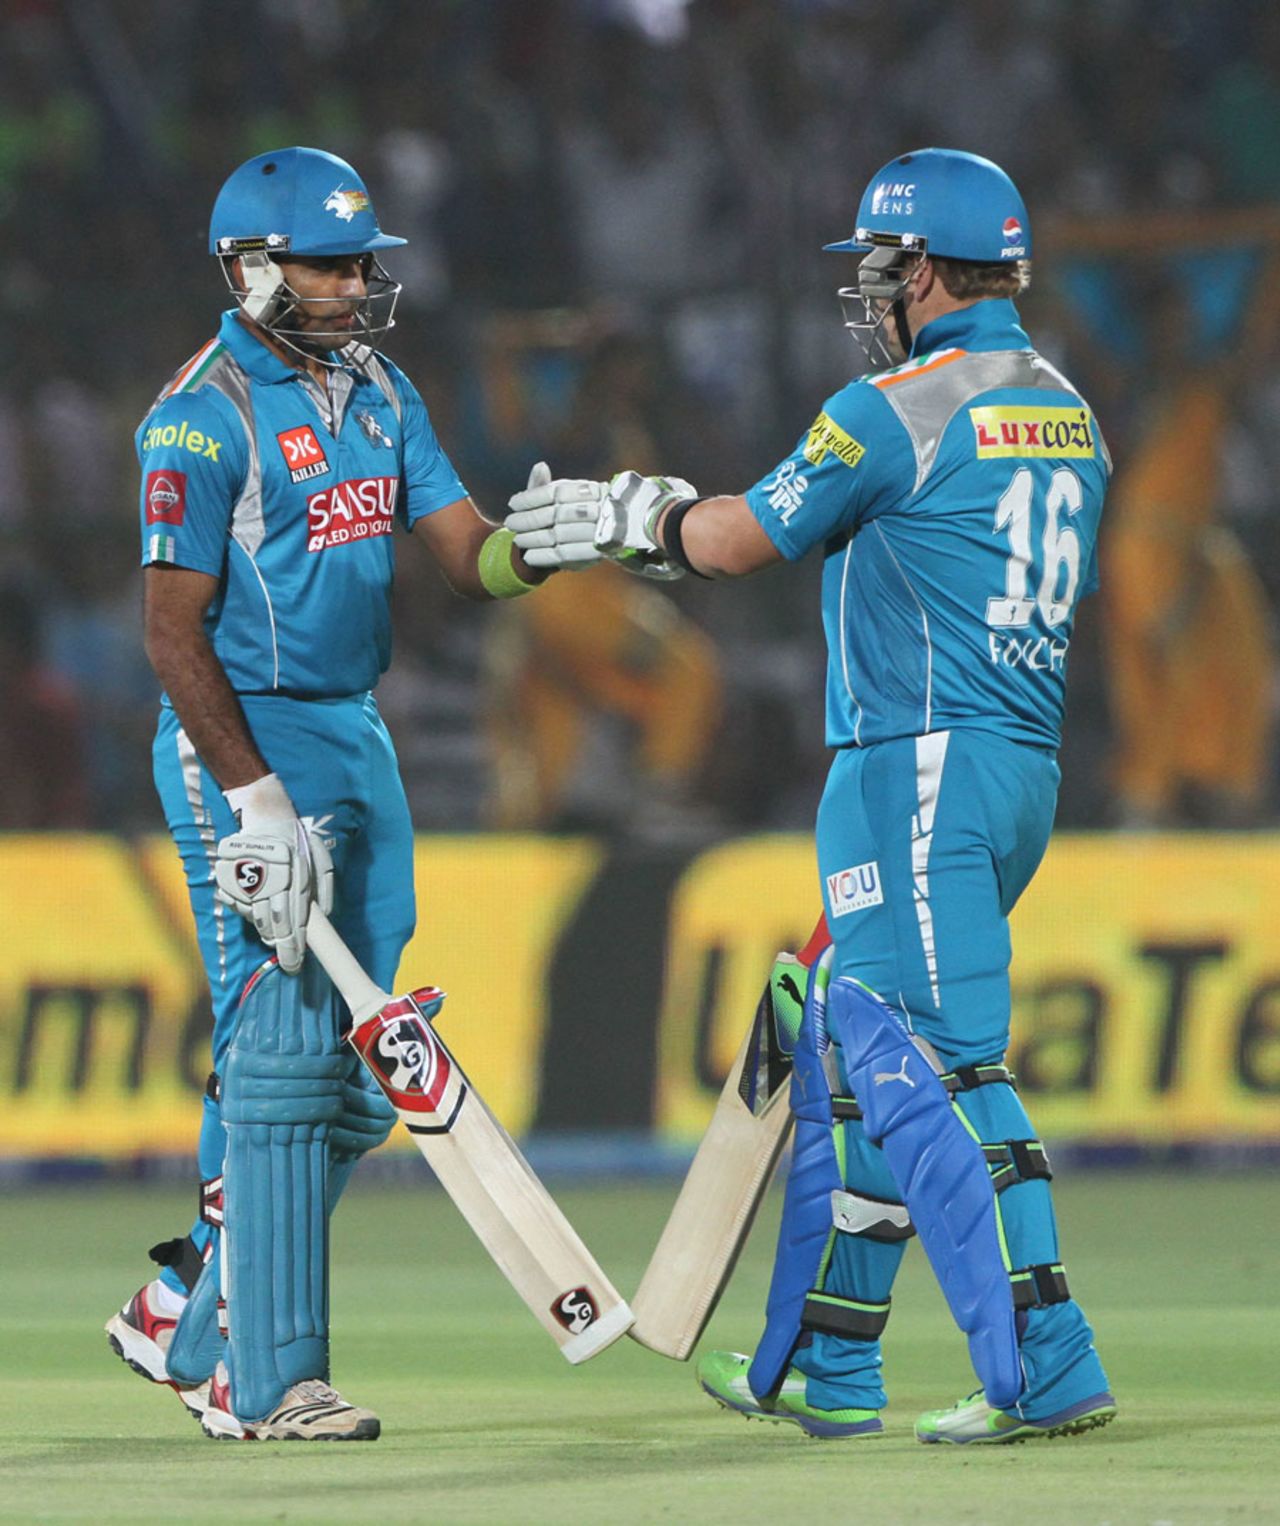 Robin Uthappa and Aaron Finch shared an opening stand of 97 runs, Rajasthan Royals v Pune Warriors, IPL 2013, Jaipur, May 5, 2013